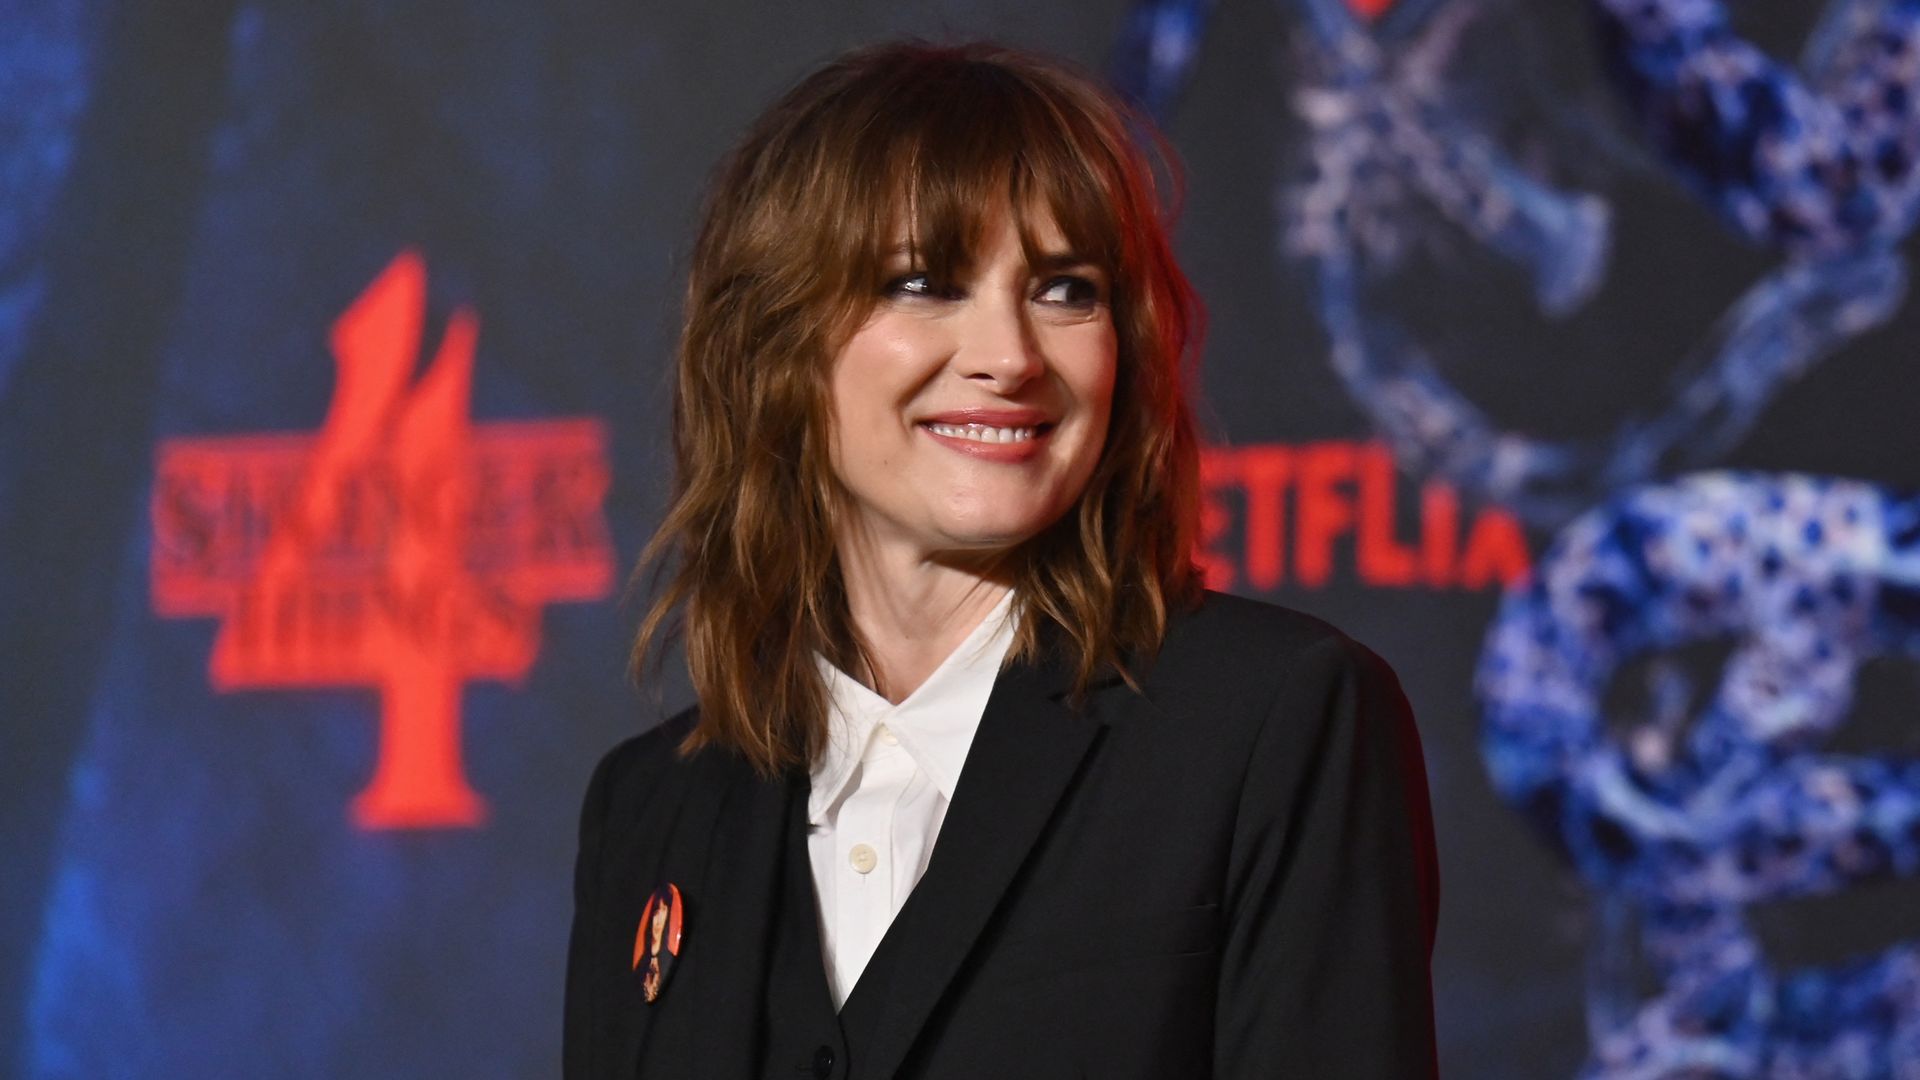 Winona Ryder opens up about her ‘disastrous’ relationships: 'What was I thinking?'